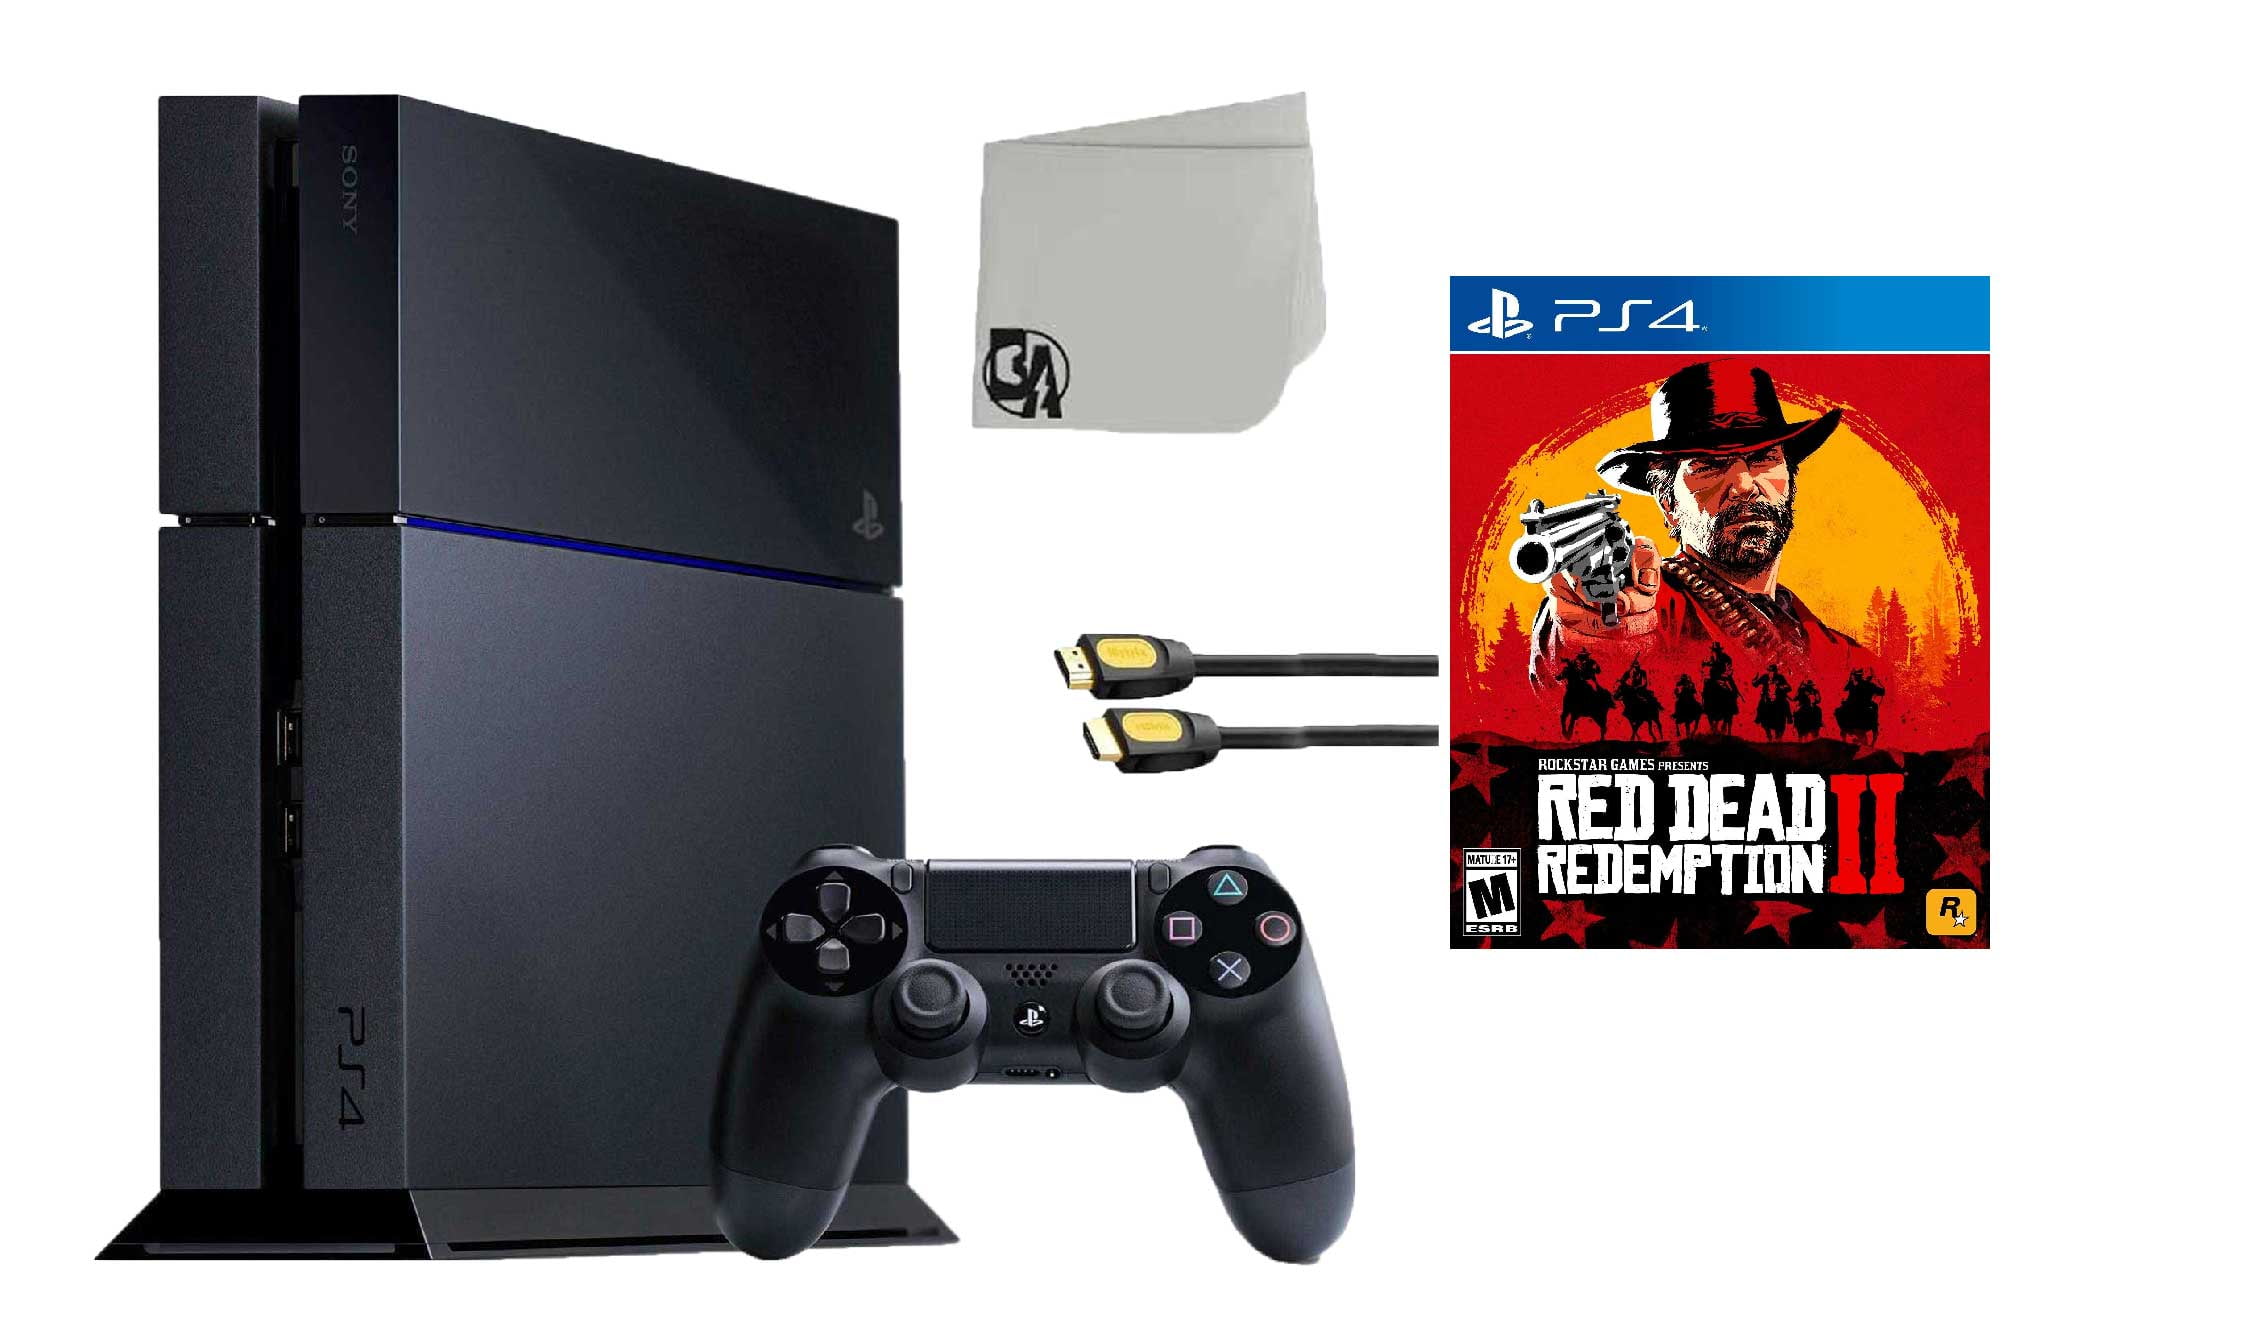 Sony PlayStation 4 500GB Gaming Console Black with Red Dead 2 BOLT AXTION Bundle Like New - Walmart.com